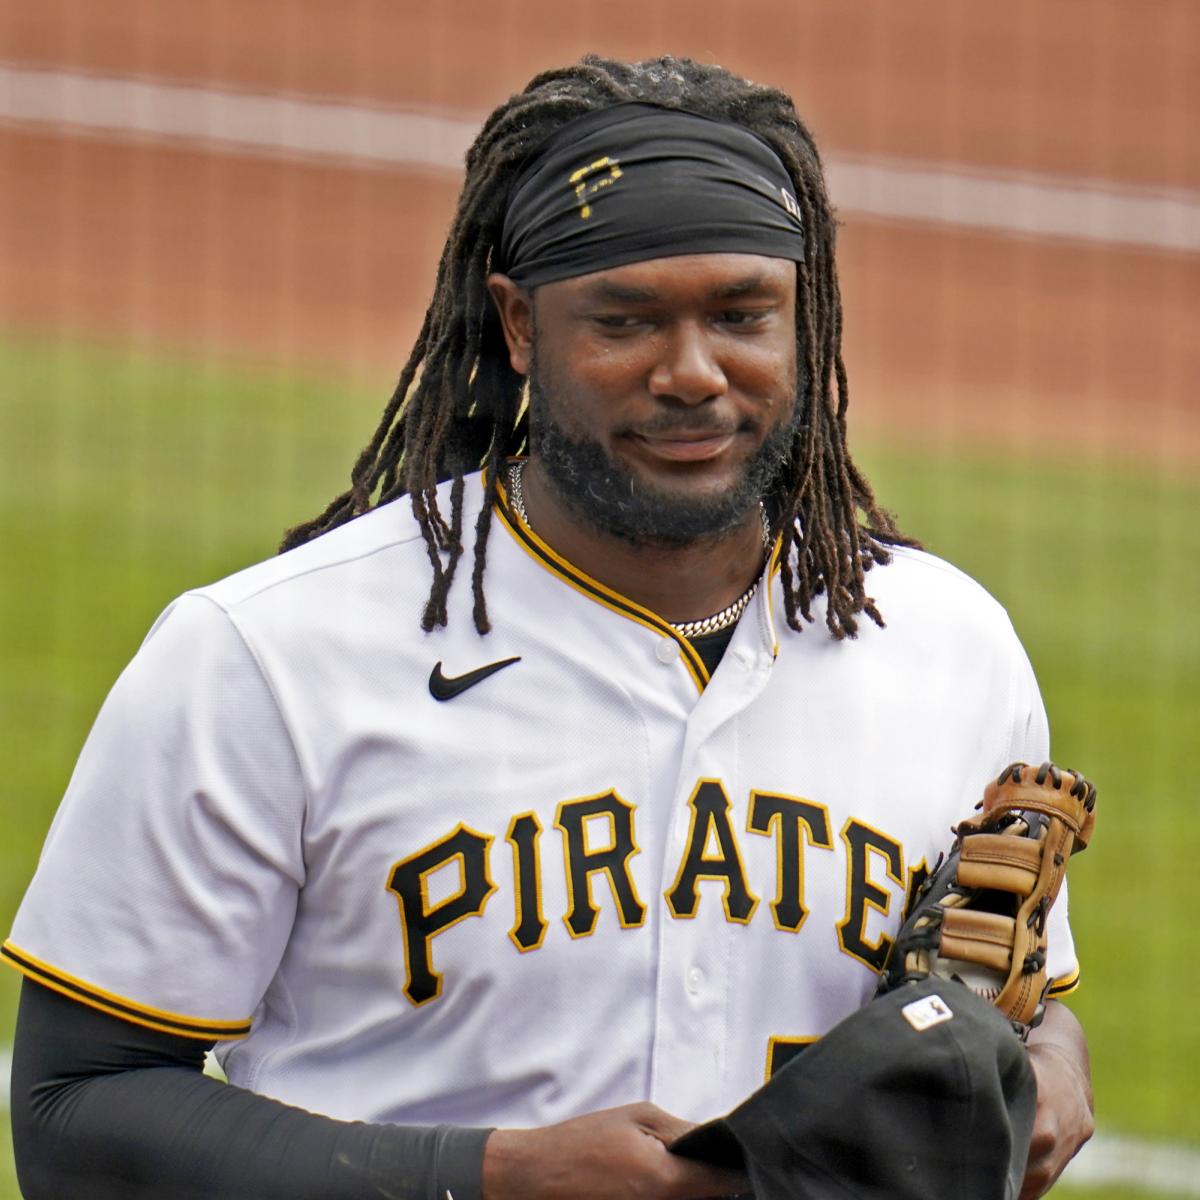 For Josh Bell, fellow former Pirates, it's 'onto the next chapter